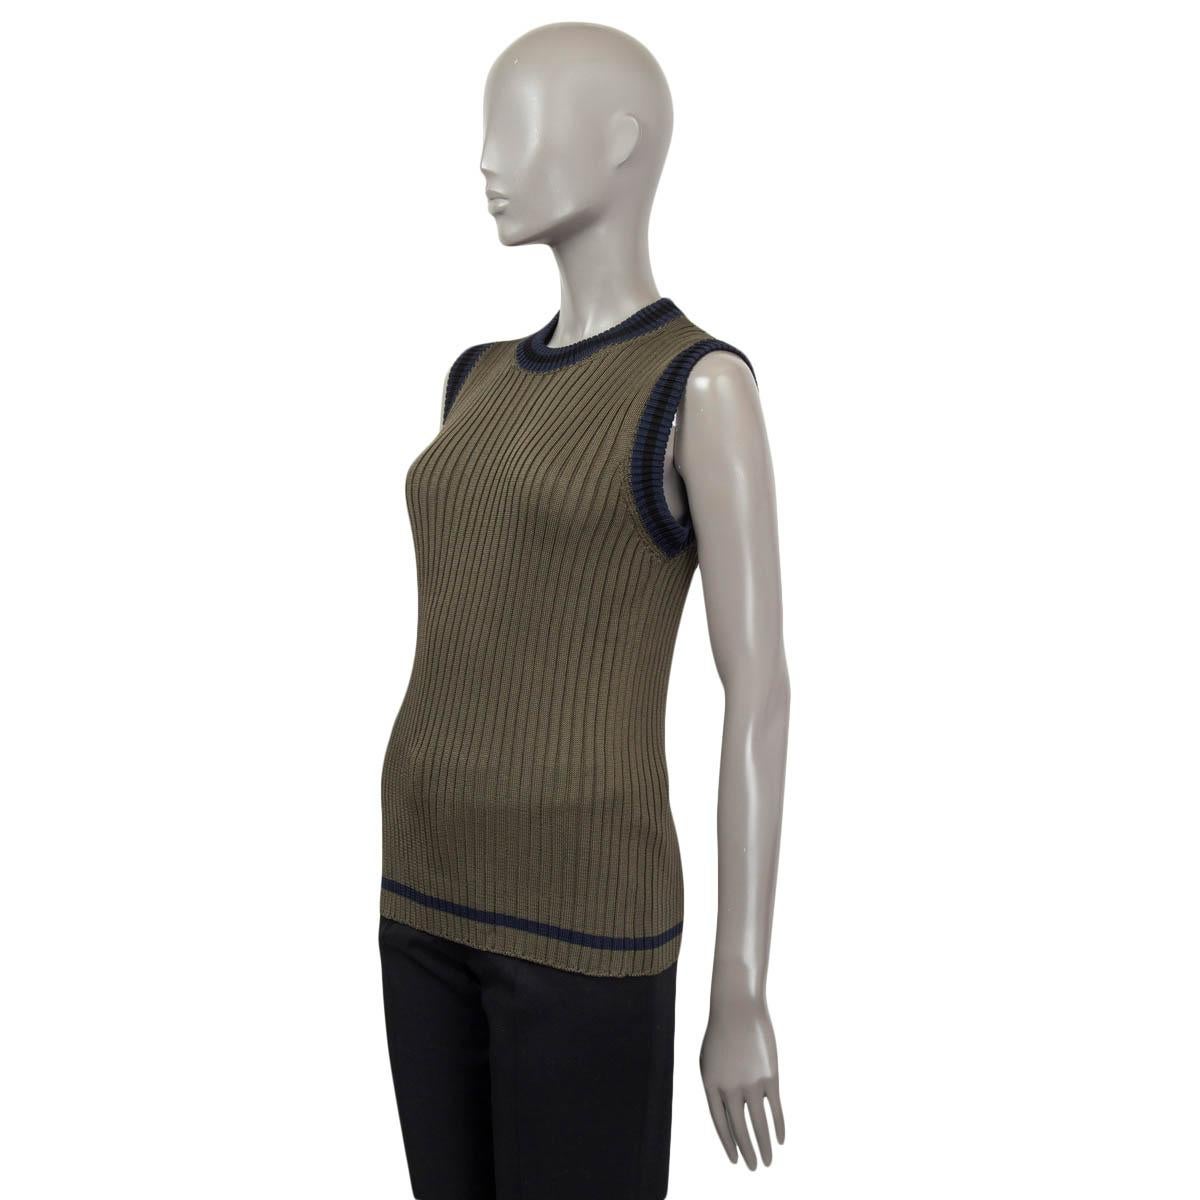 PRADA olive green & navy blue viscose SLEEVELESS RIB KNIT Sweater 42 M In Excellent Condition For Sale In Zürich, CH